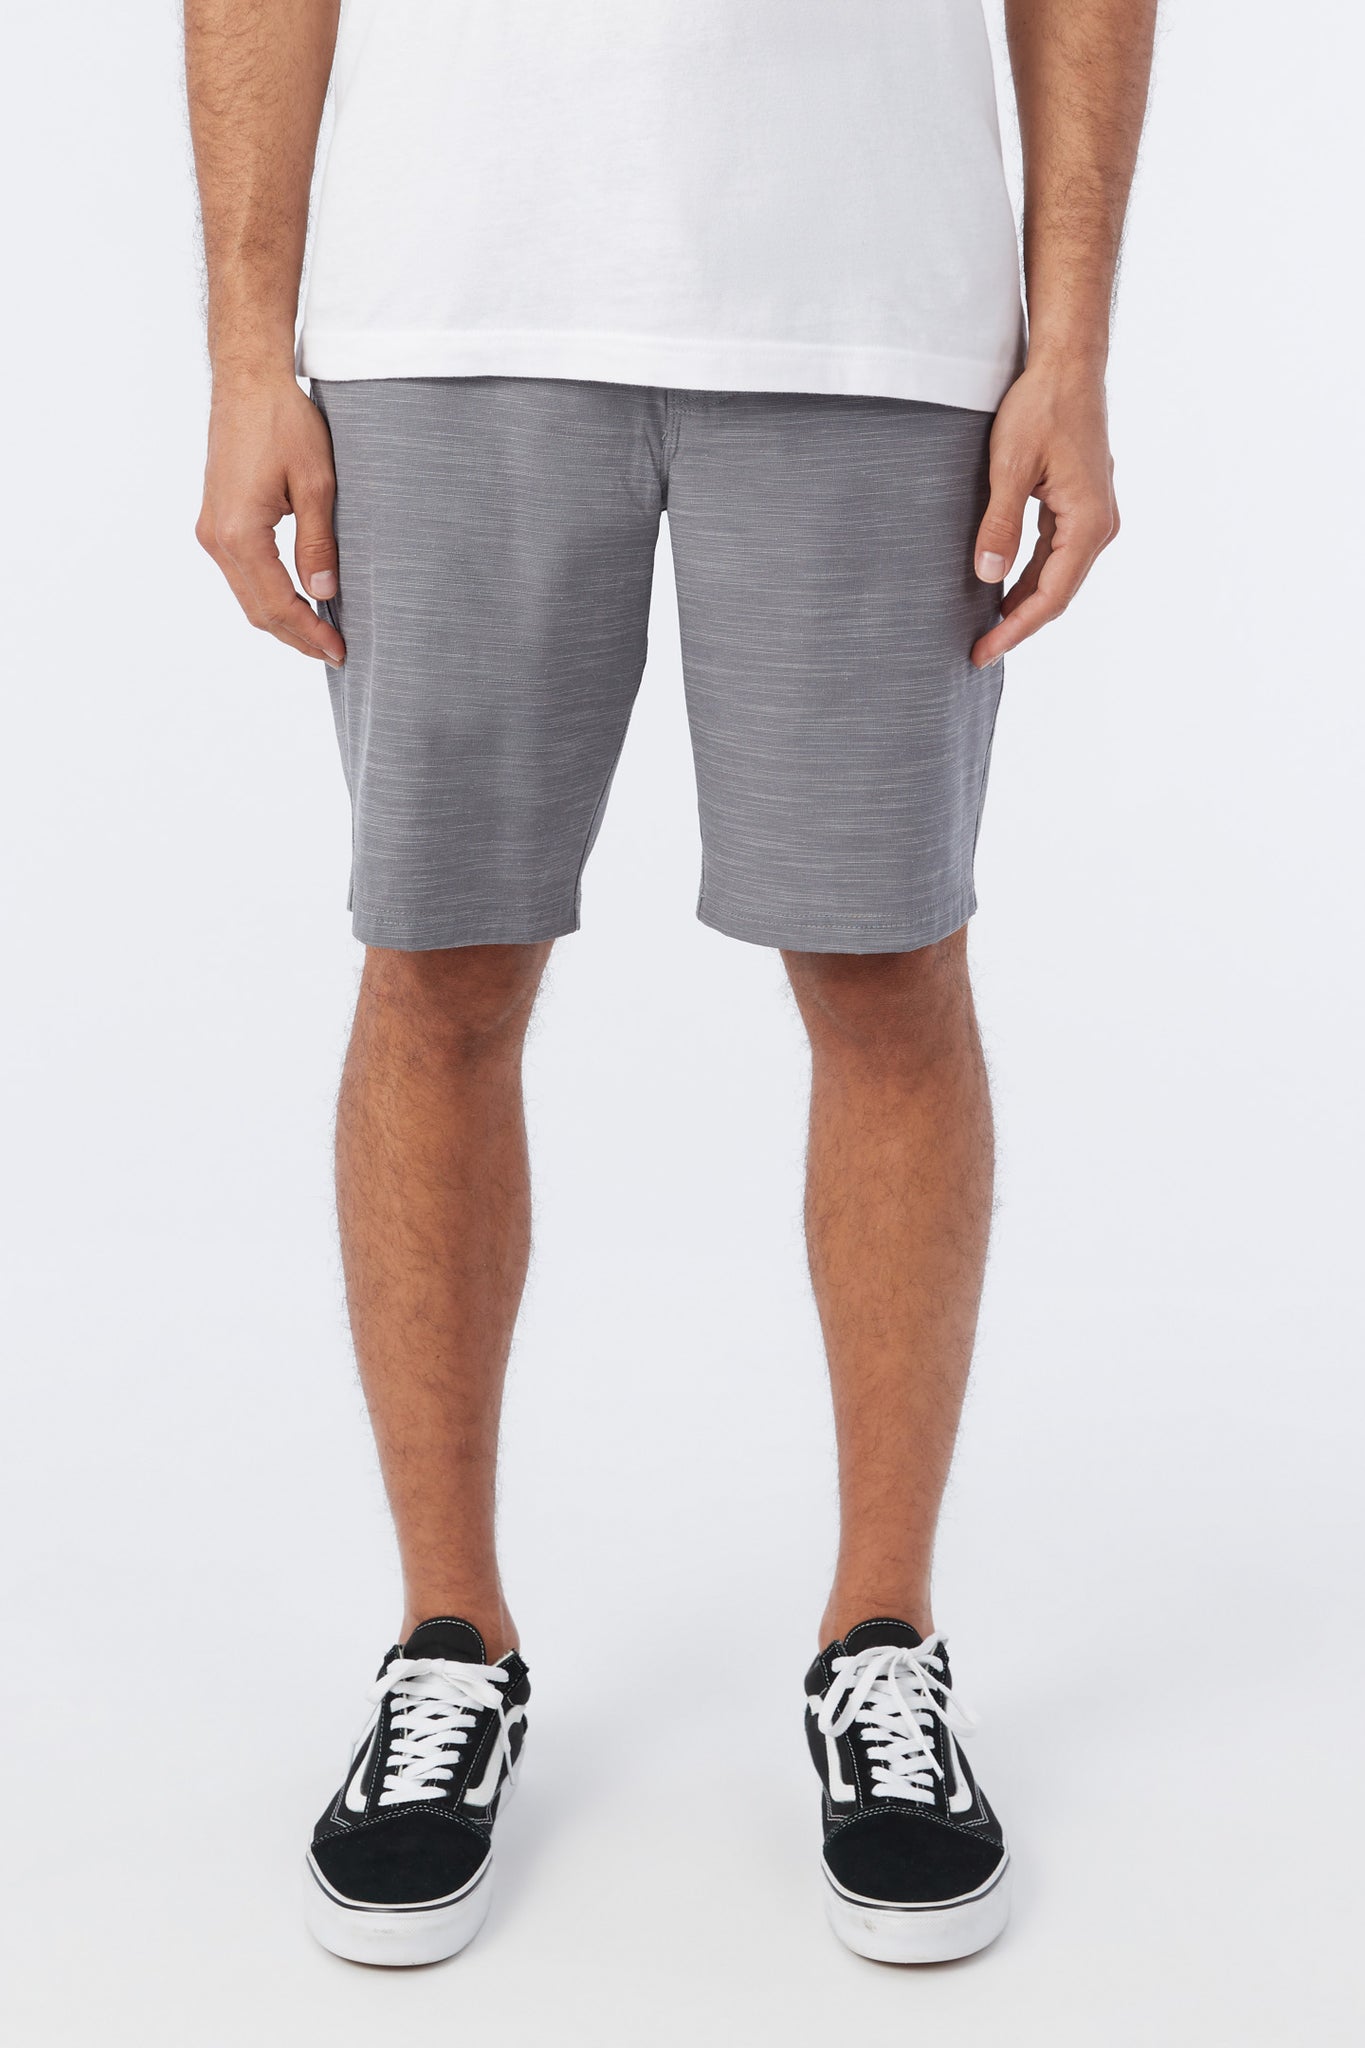 The North Face Outdoor Hybrid Shorts / Tradewinds Grey